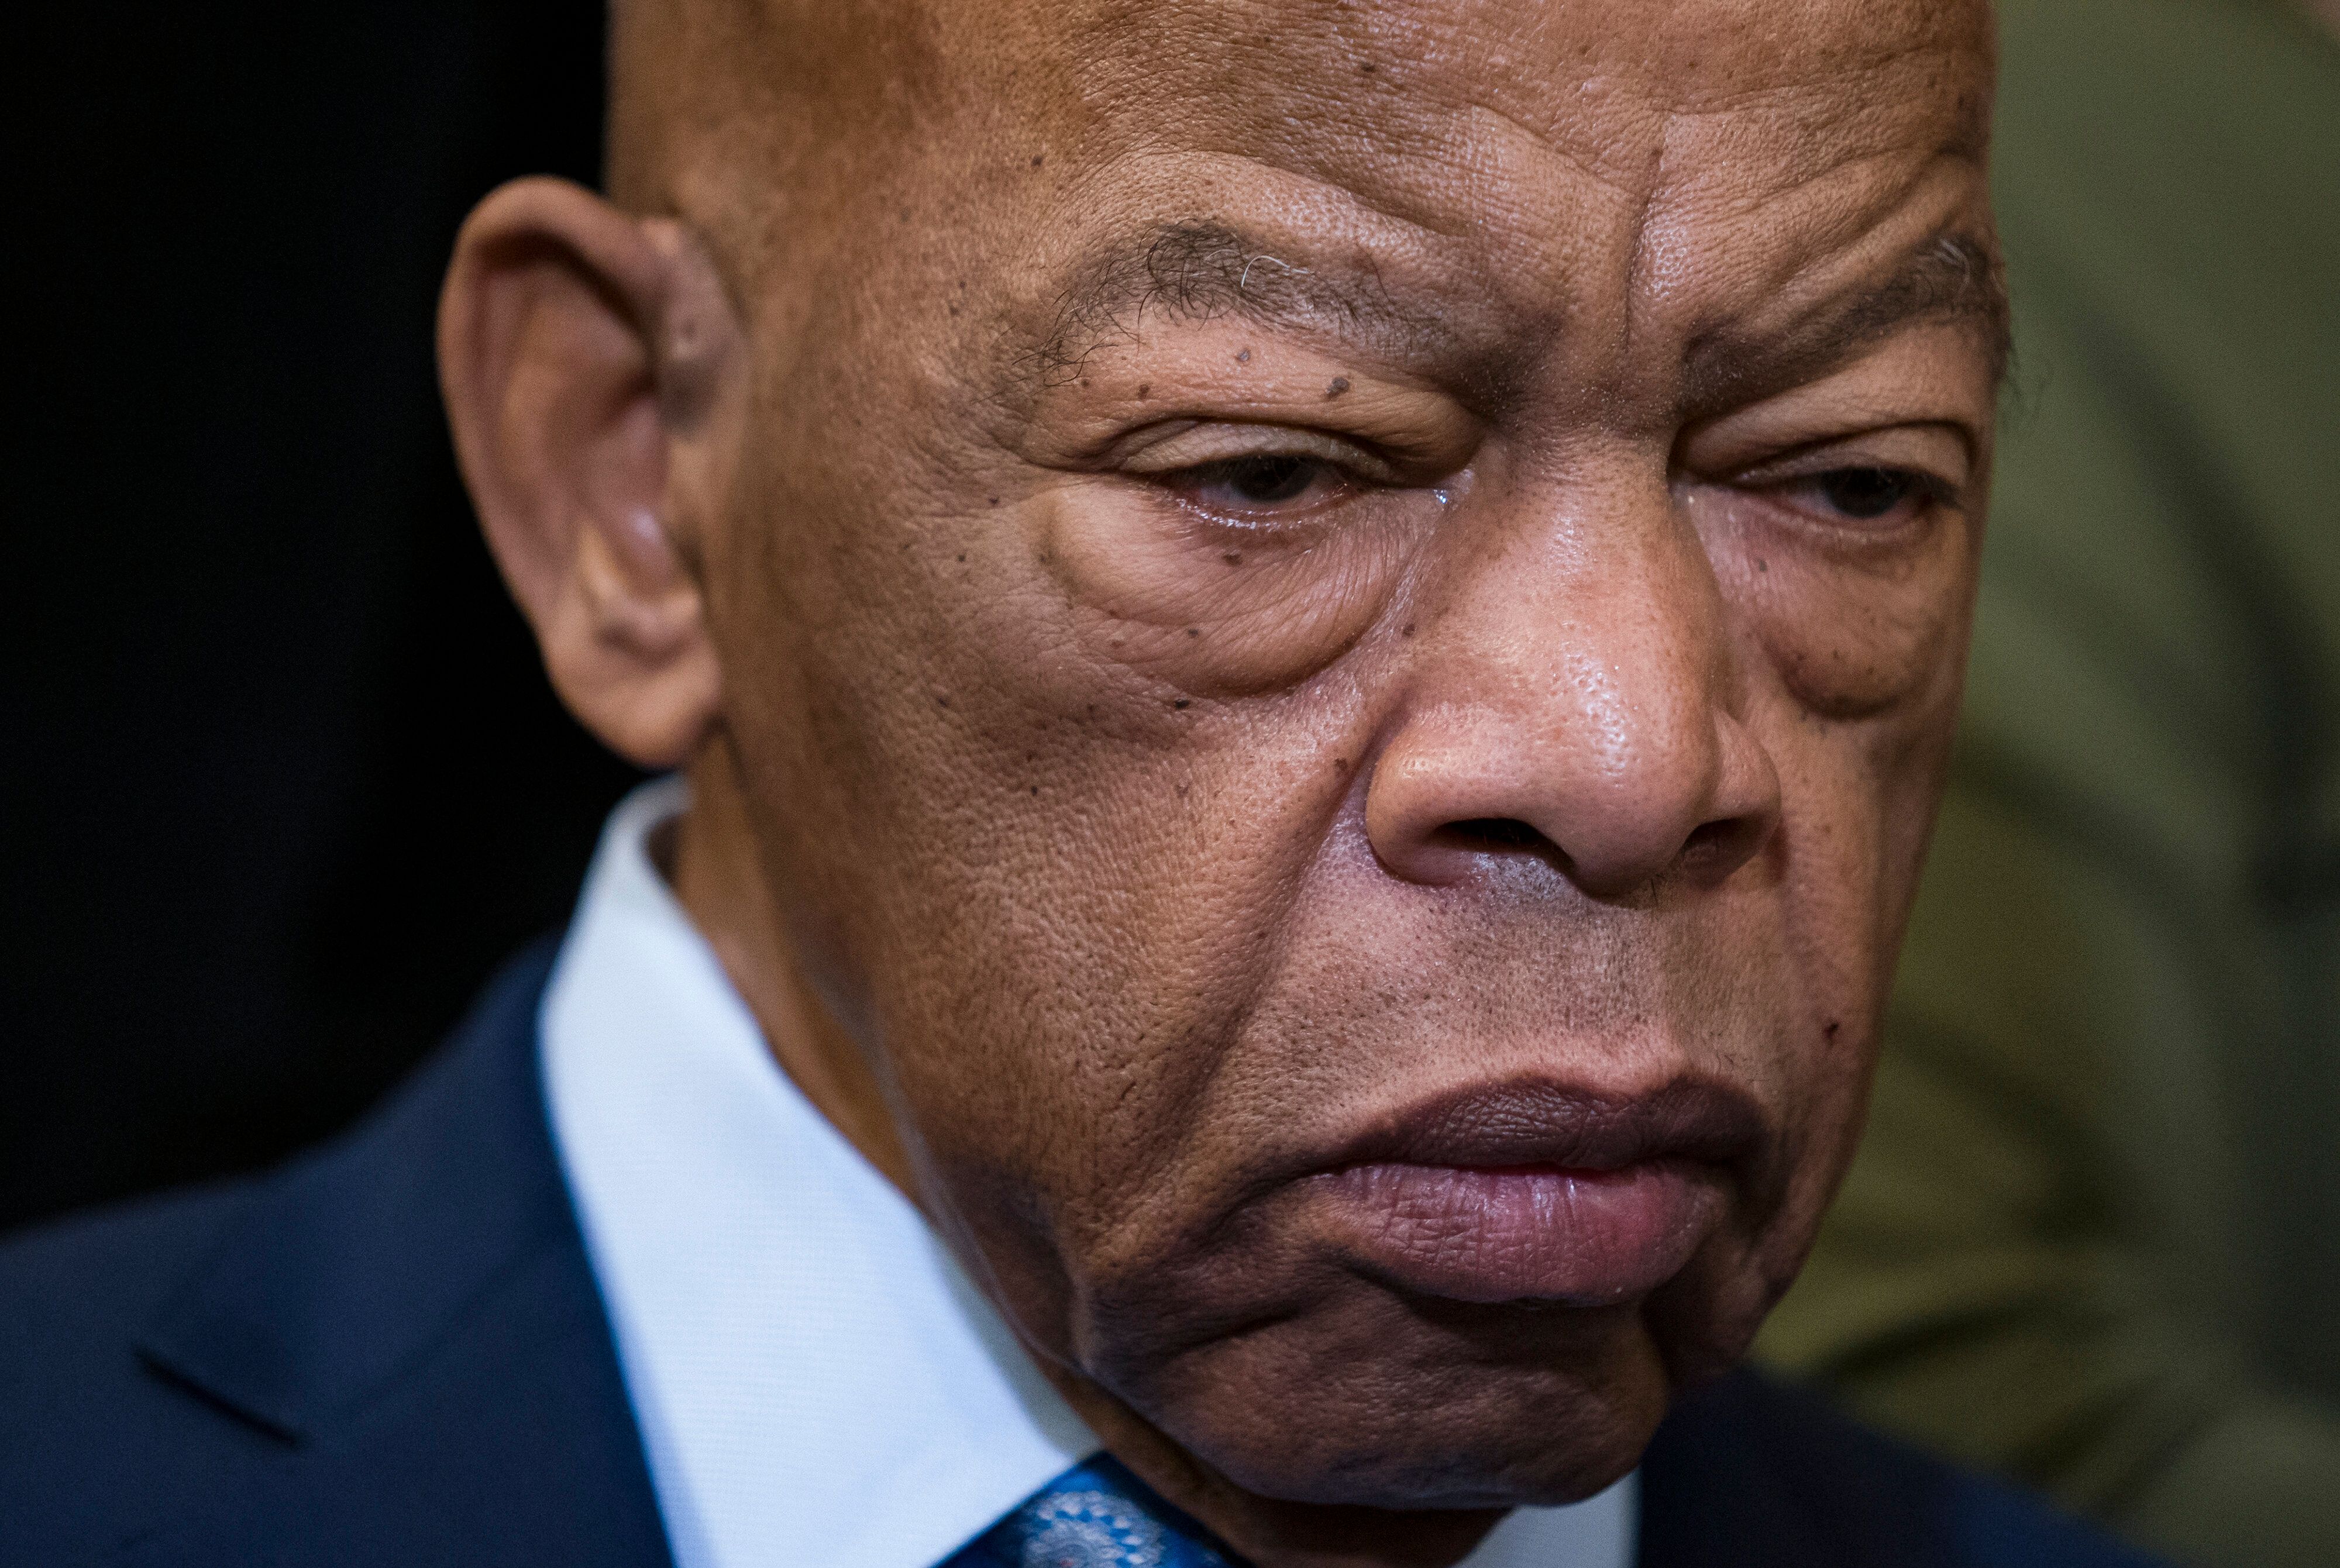 Rep. John Lewis Diagnosed With Stage 4 Pancreatic Cancer